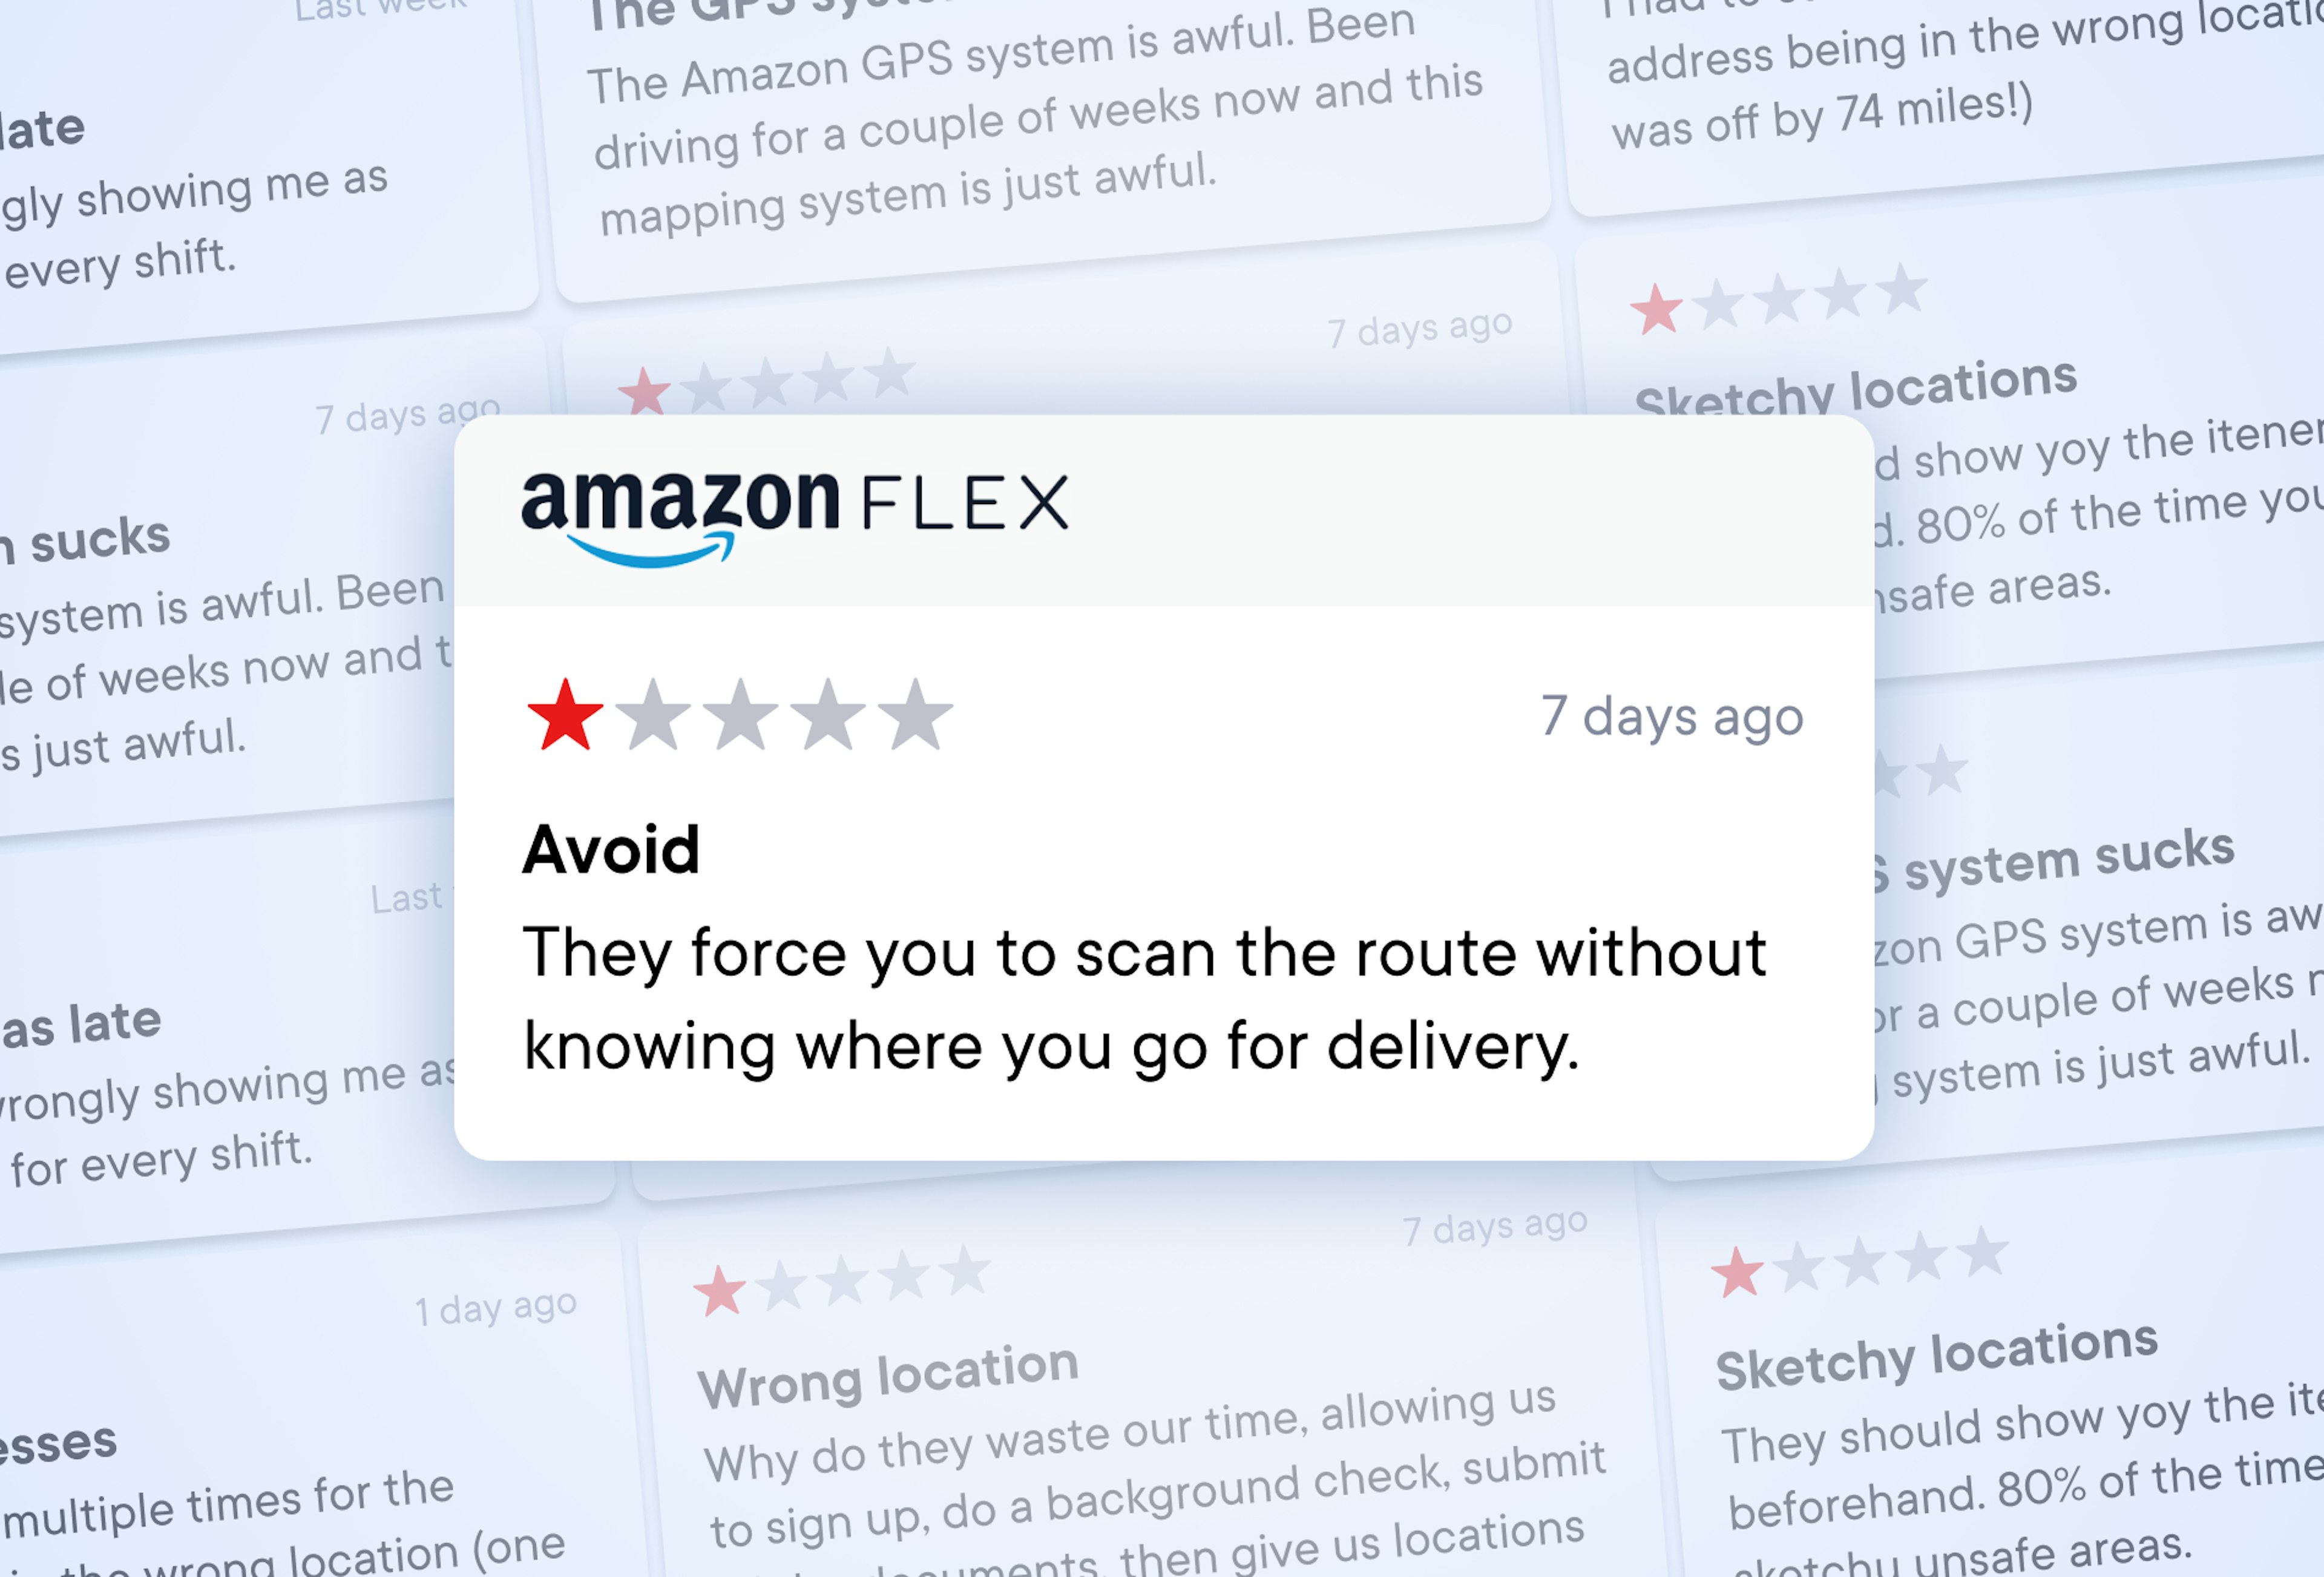 Amazon Flex app review showing one-star rating. "They leave you to scan the route without knowing where you go for delivery".